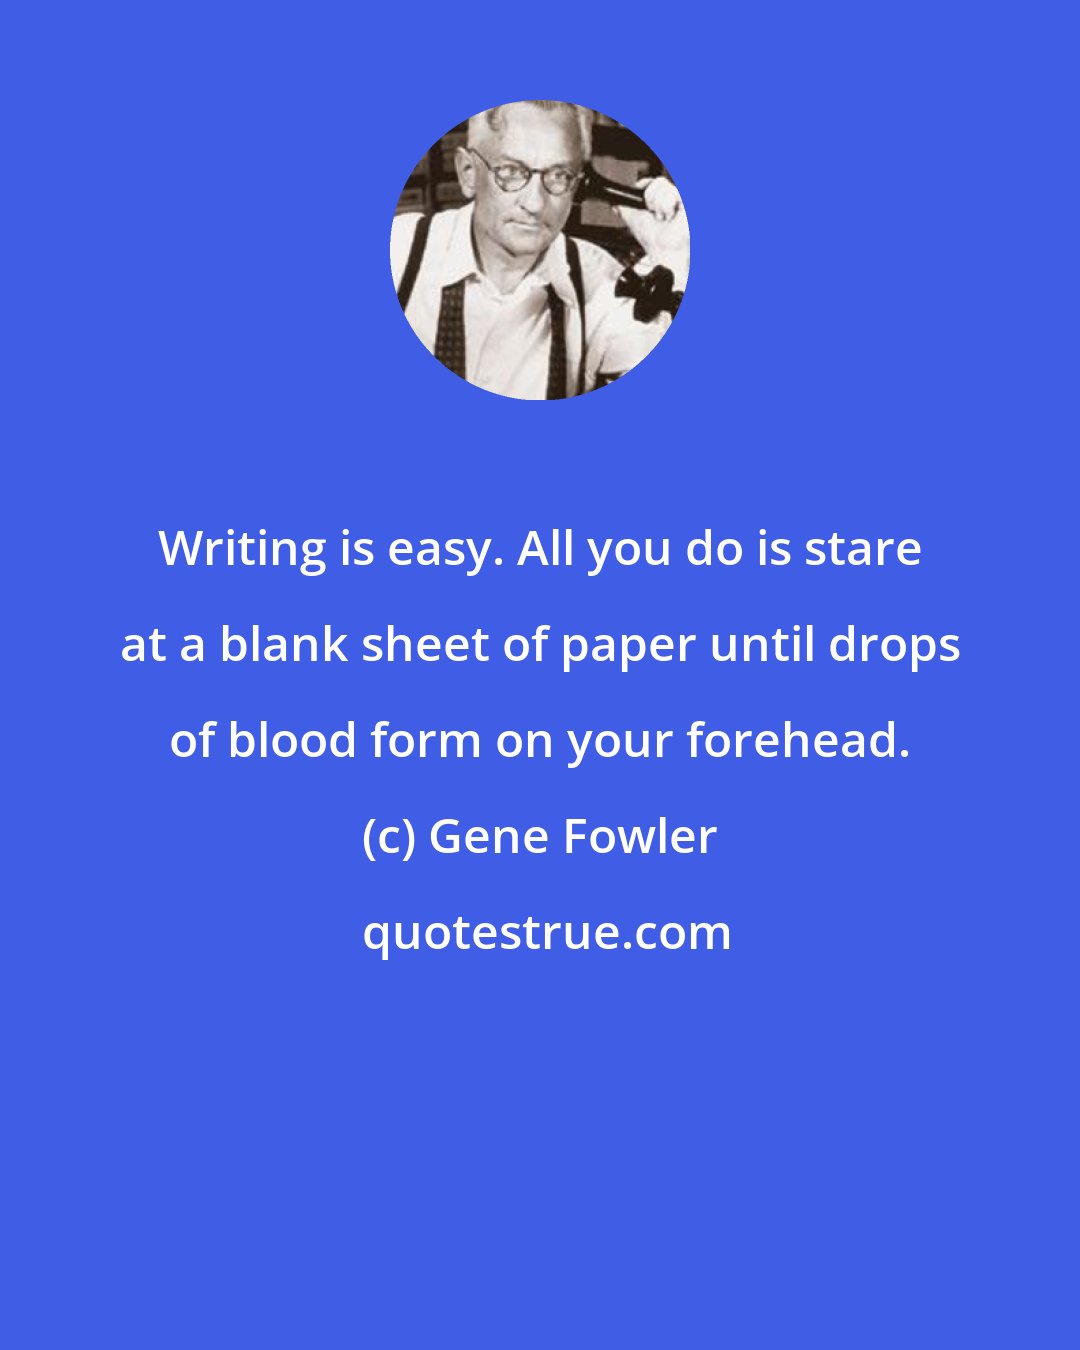 Gene Fowler: Writing is easy. All you do is stare at a blank sheet of paper until drops of blood form on your forehead.